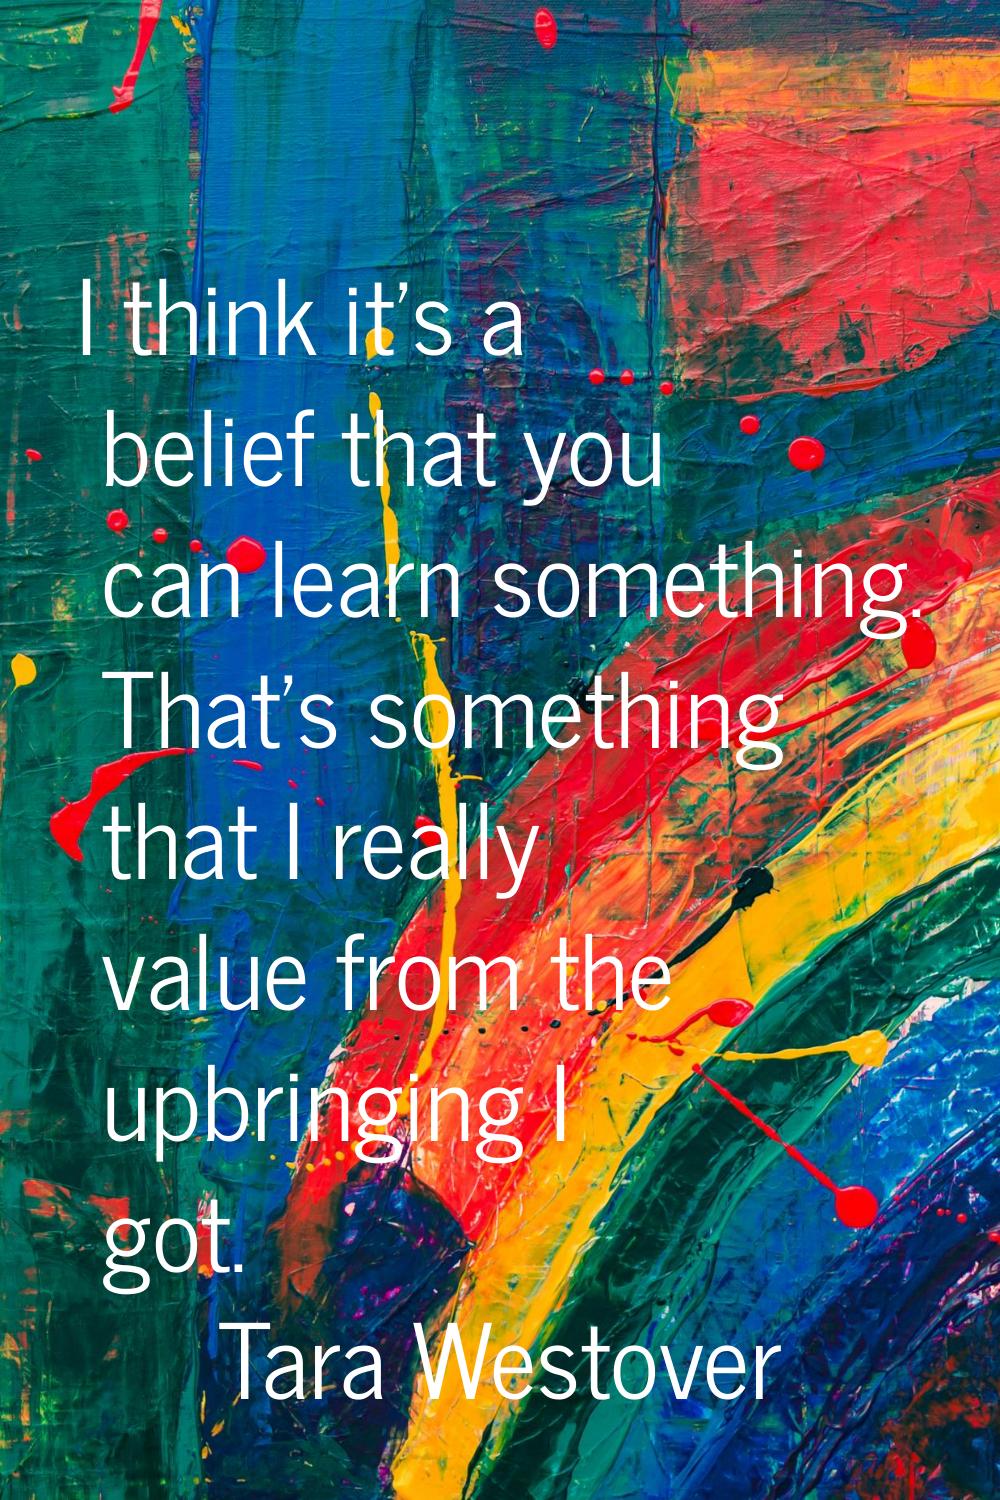 I think it's a belief that you can learn something. That's something that I really value from the u